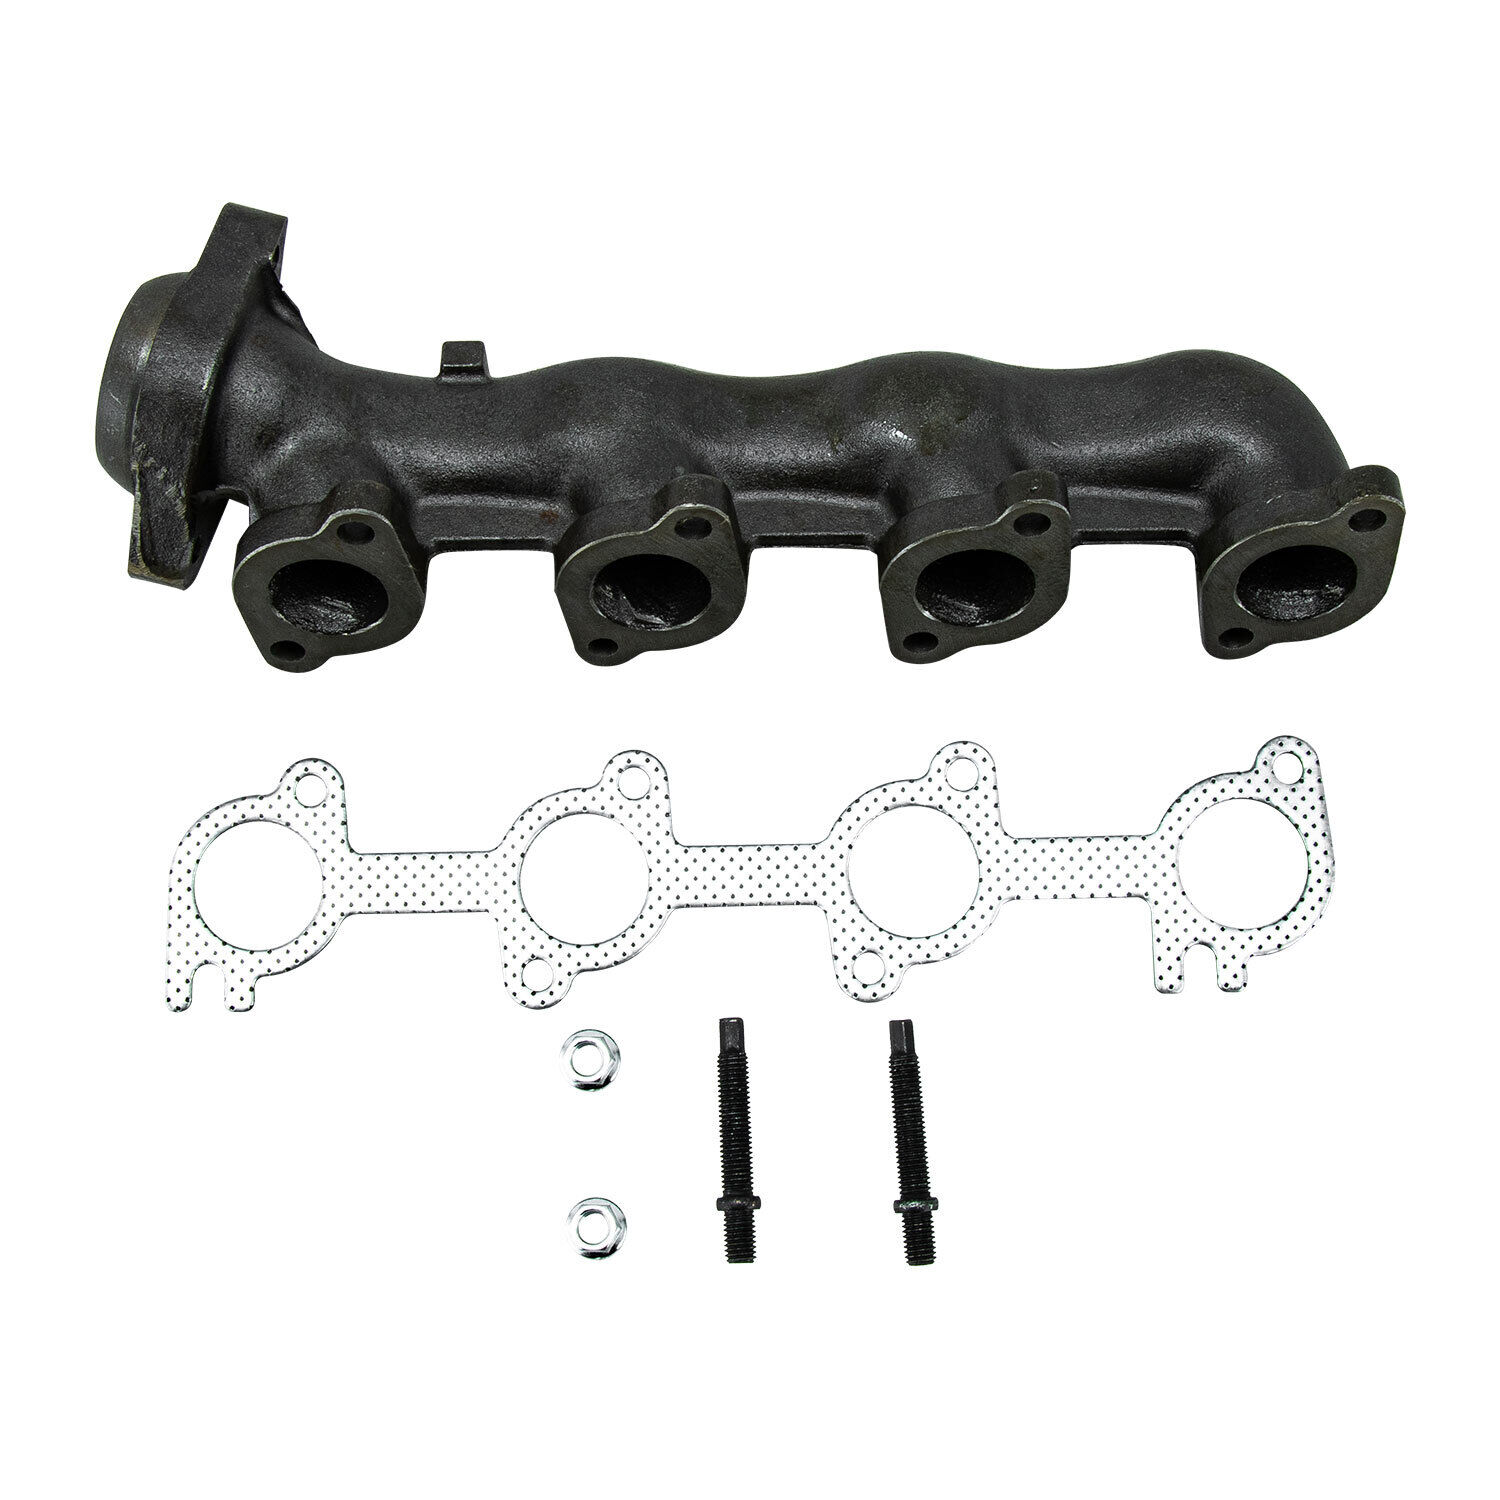 Exhaust Manifold Right fits 1997 1998 Ford Expedition F-Series Pickup Truck 4.6L